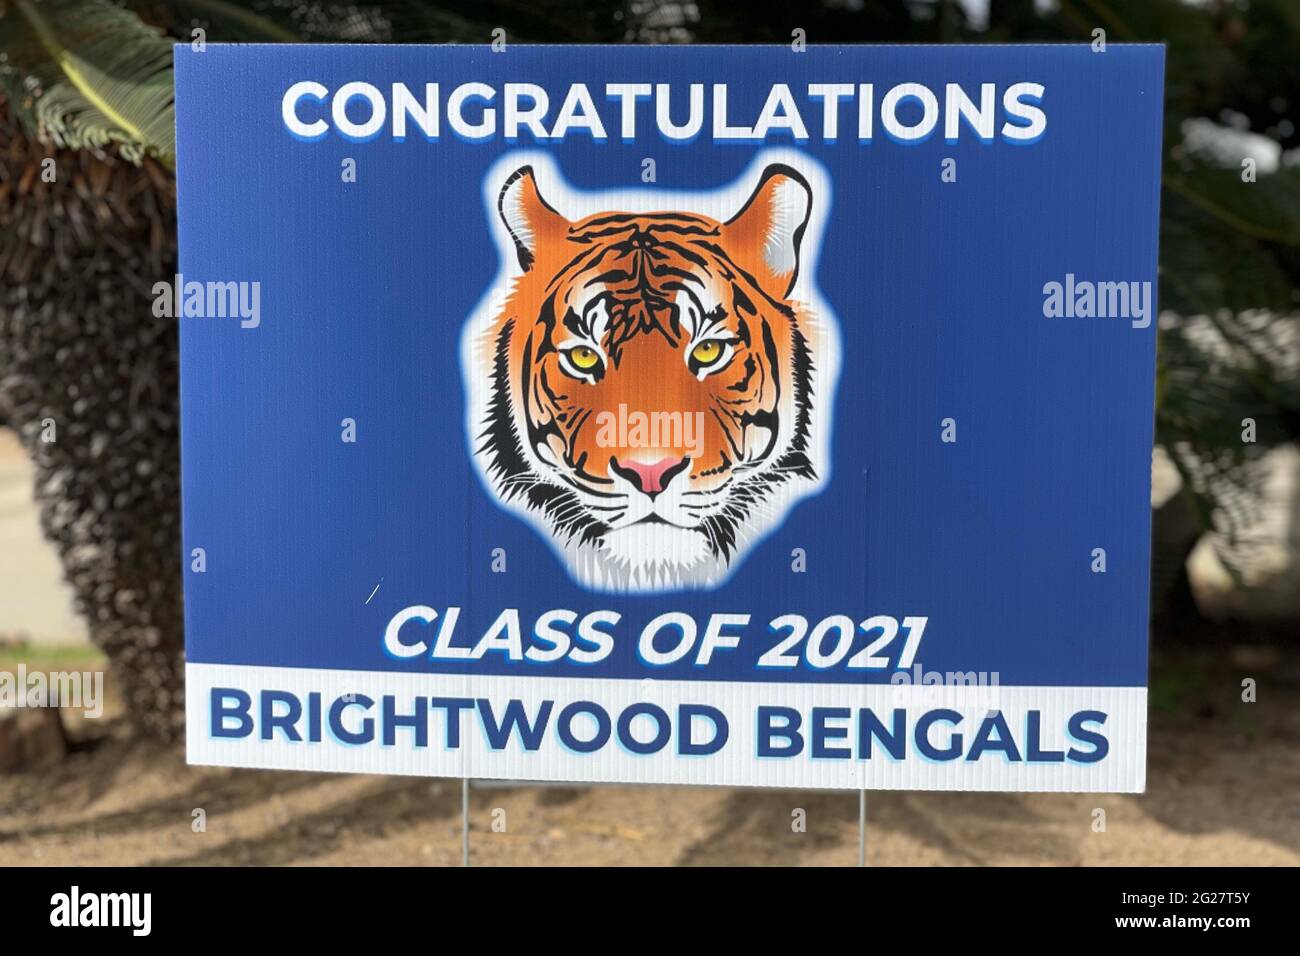 A Congratulations Class of 2021 sign for Brightwood Elementary School students, Tuesday, June 8, 2021, at a residence in Monterey Park, Calif. Stock Photo